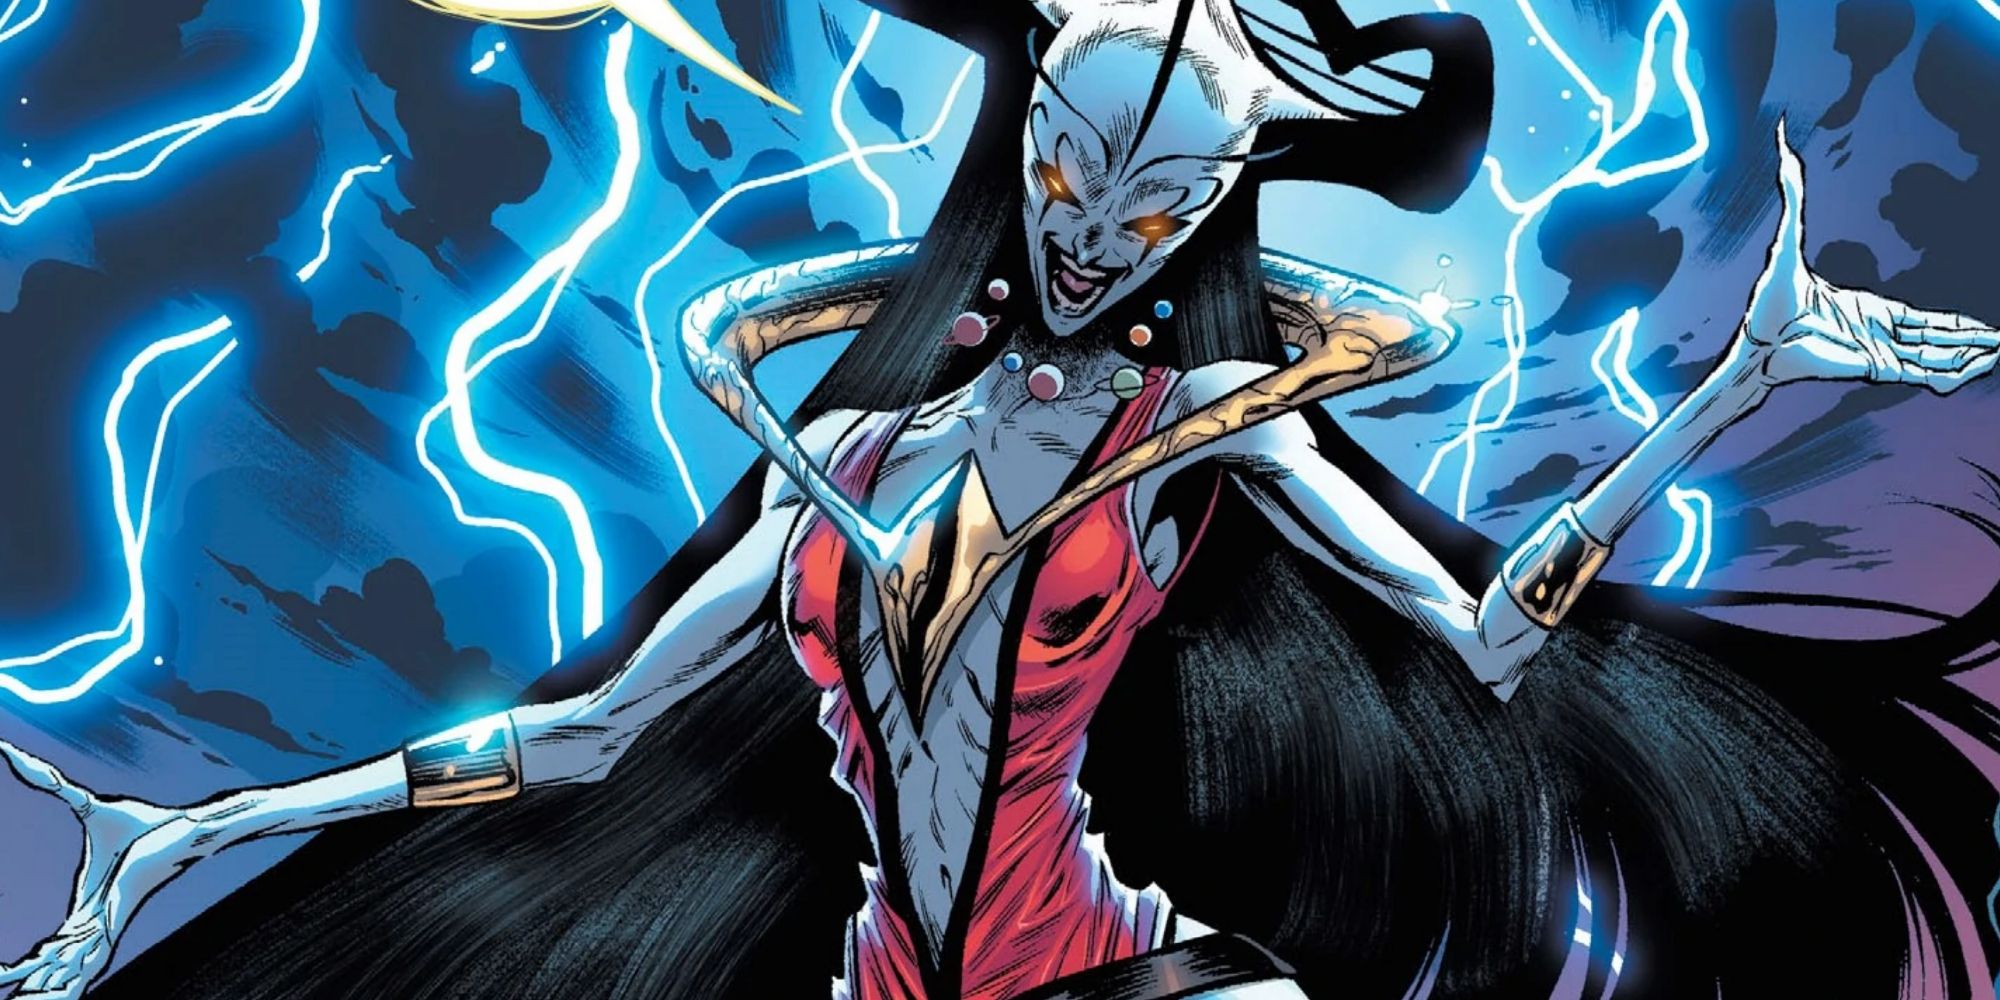 Perpetua as The Mother of the Multiverse in DC Comics